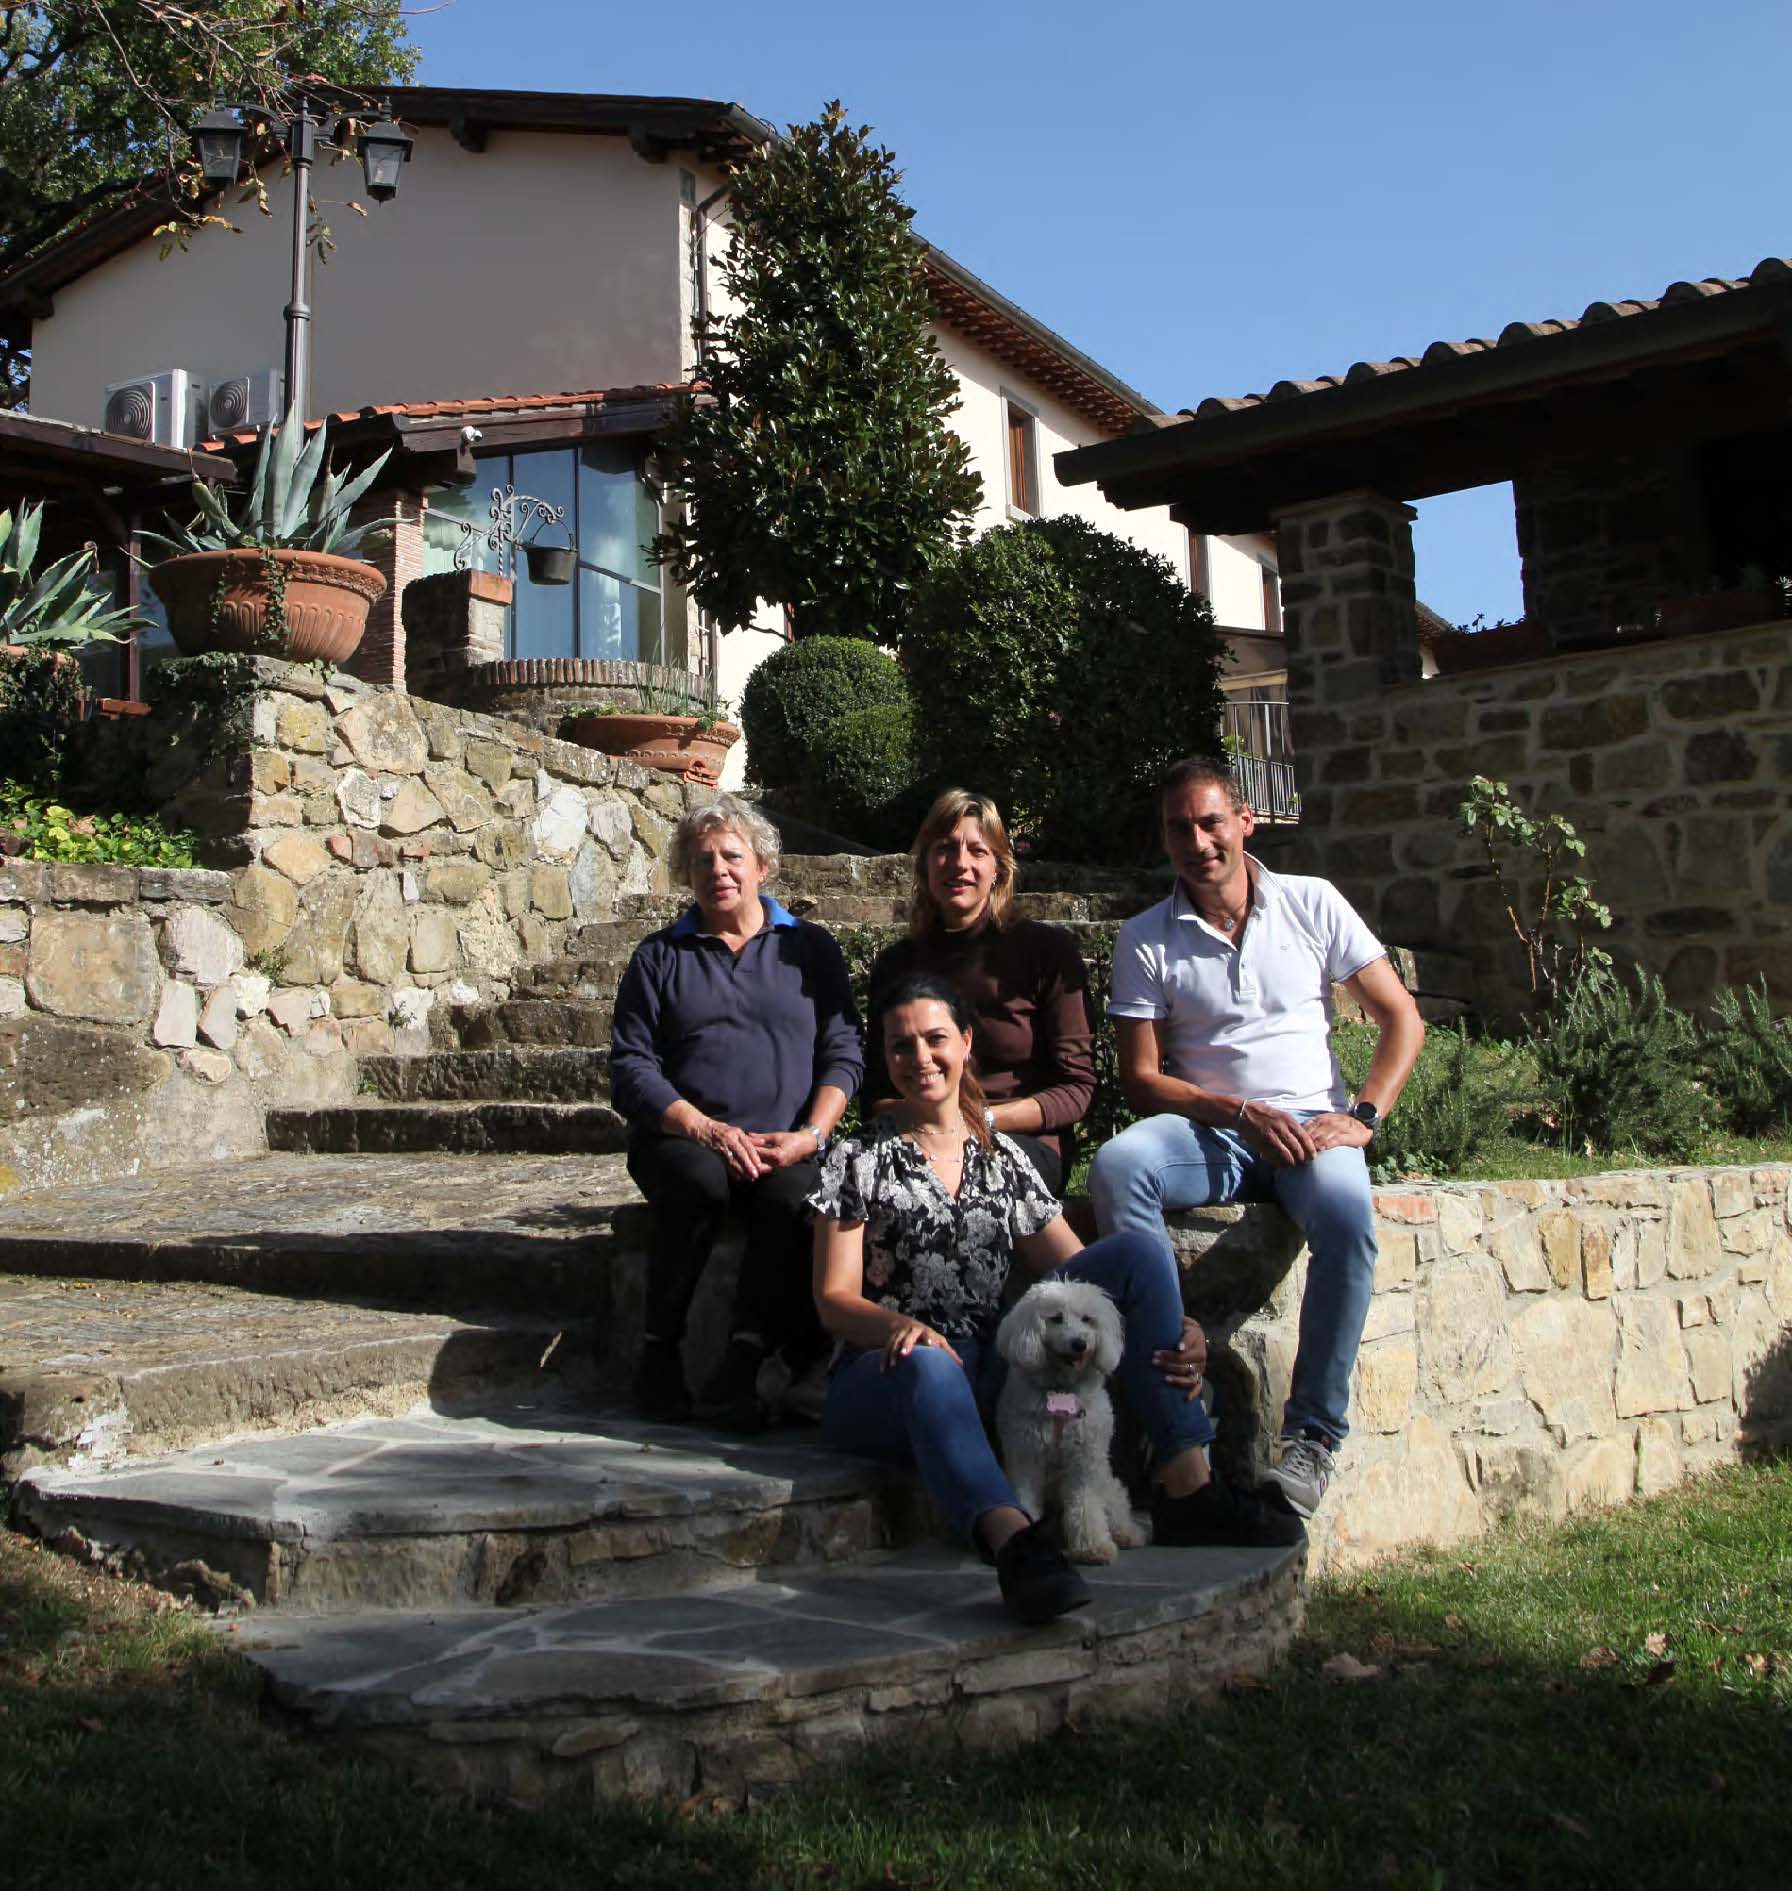 La Torricella: a story of family commitment and passion